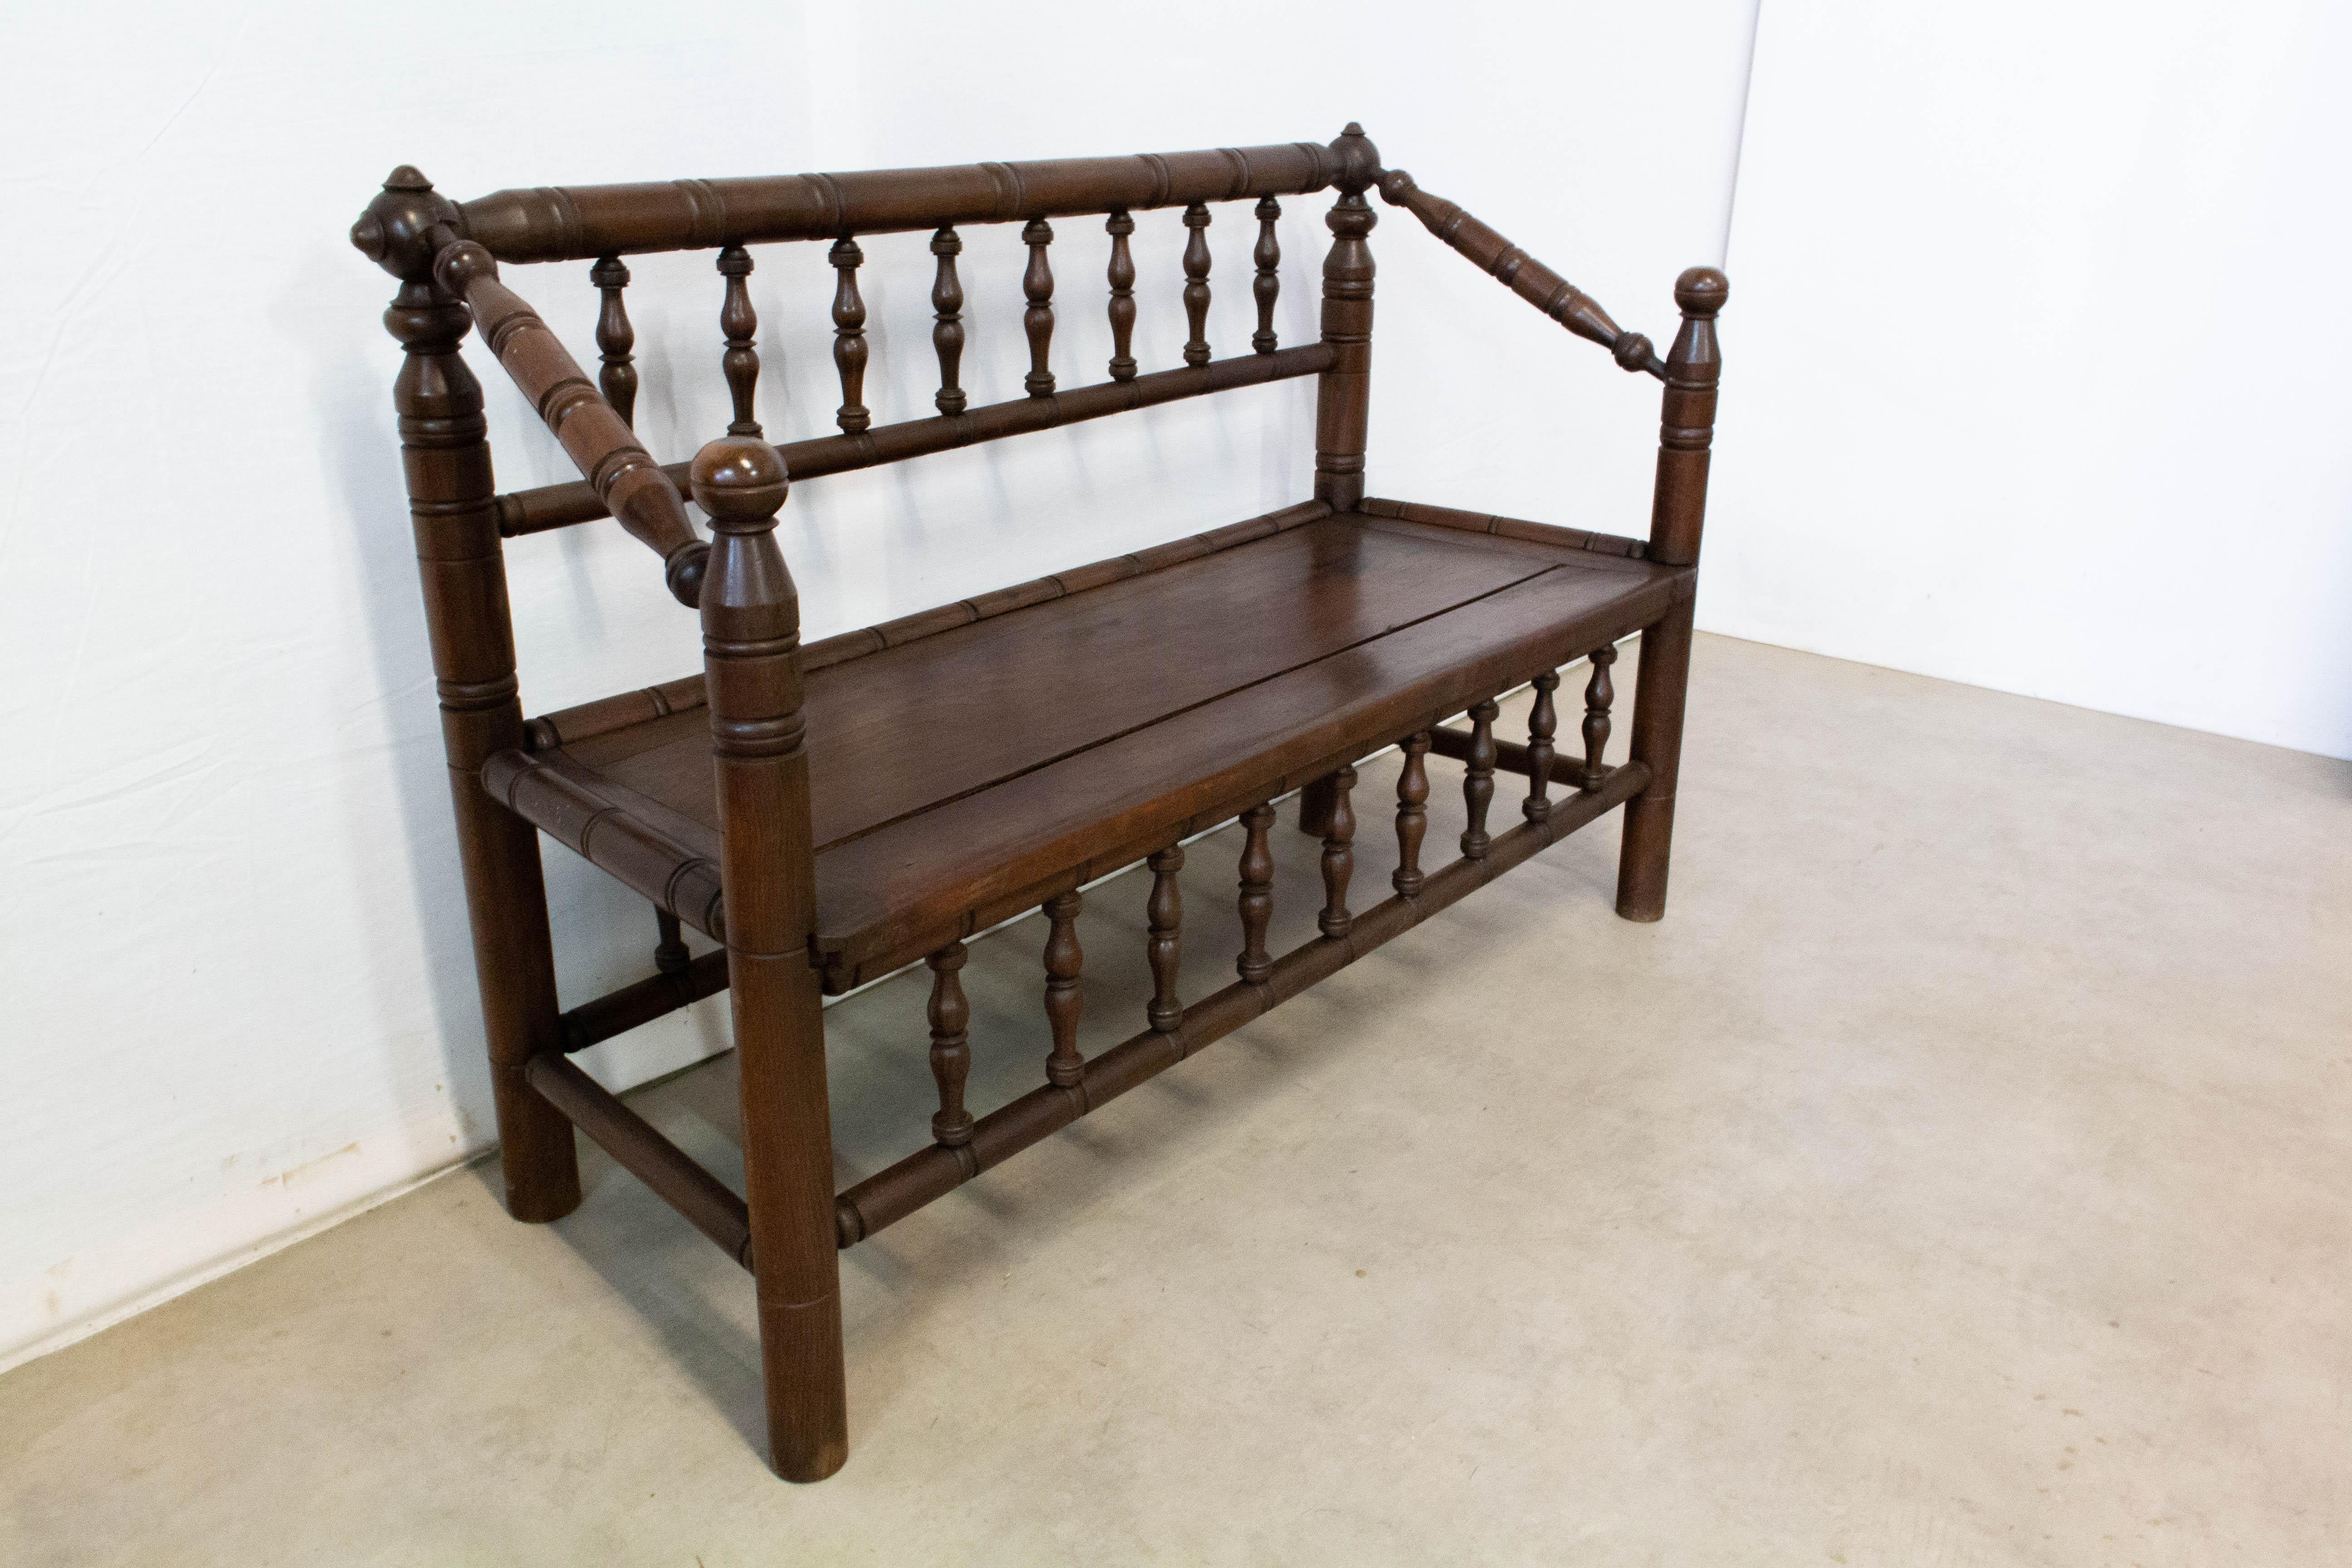 French provincial hall baluster bench, late 18th century
In the turner's chairs style, 
Open arms with inset turnings, carved beech
Attractive settle would look great in any room
In good antique condition with minor signs of use for its